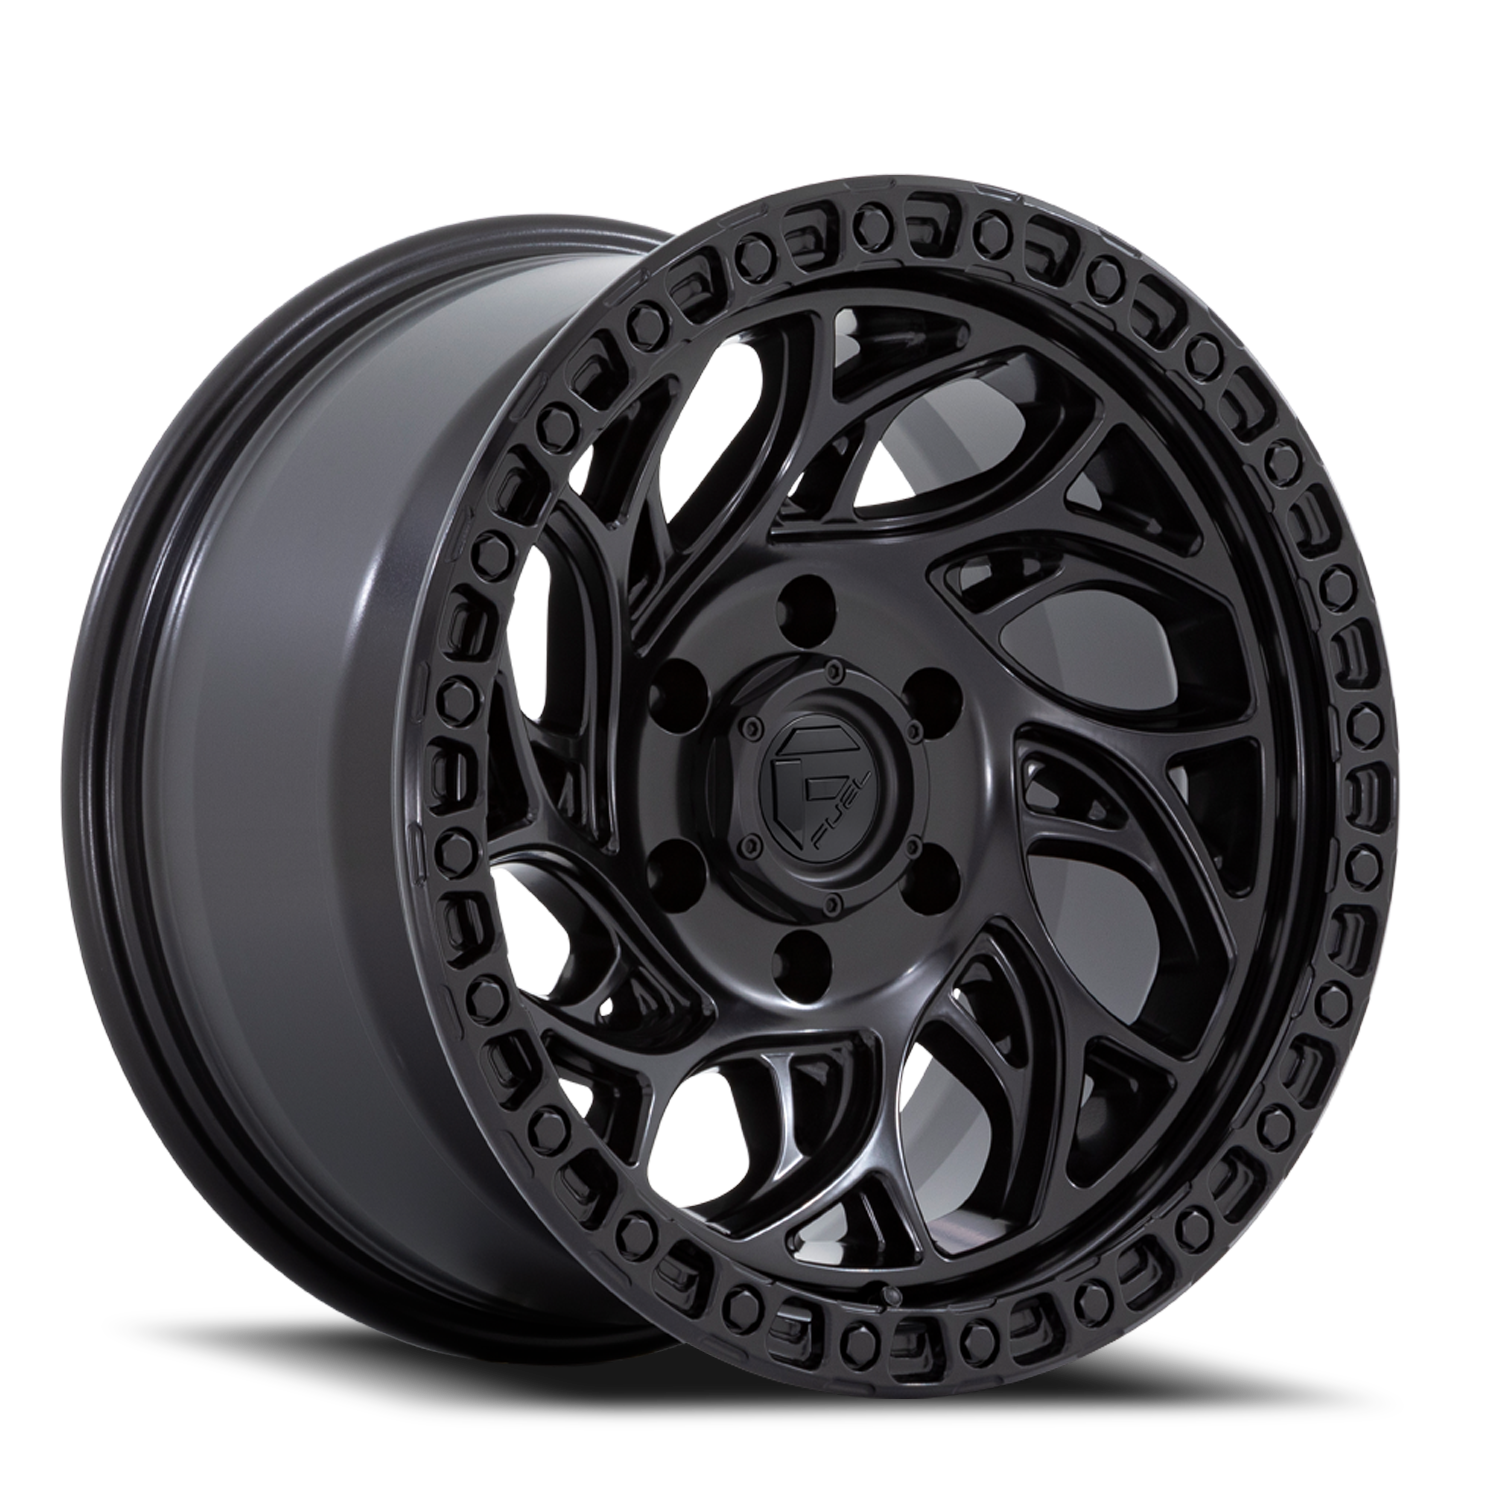 Aluminum Wheels 20X9 Runner OR D852 6 On 114.3 Blackout 66.06 Bore 20 Offset Fuel Off Road Wheels